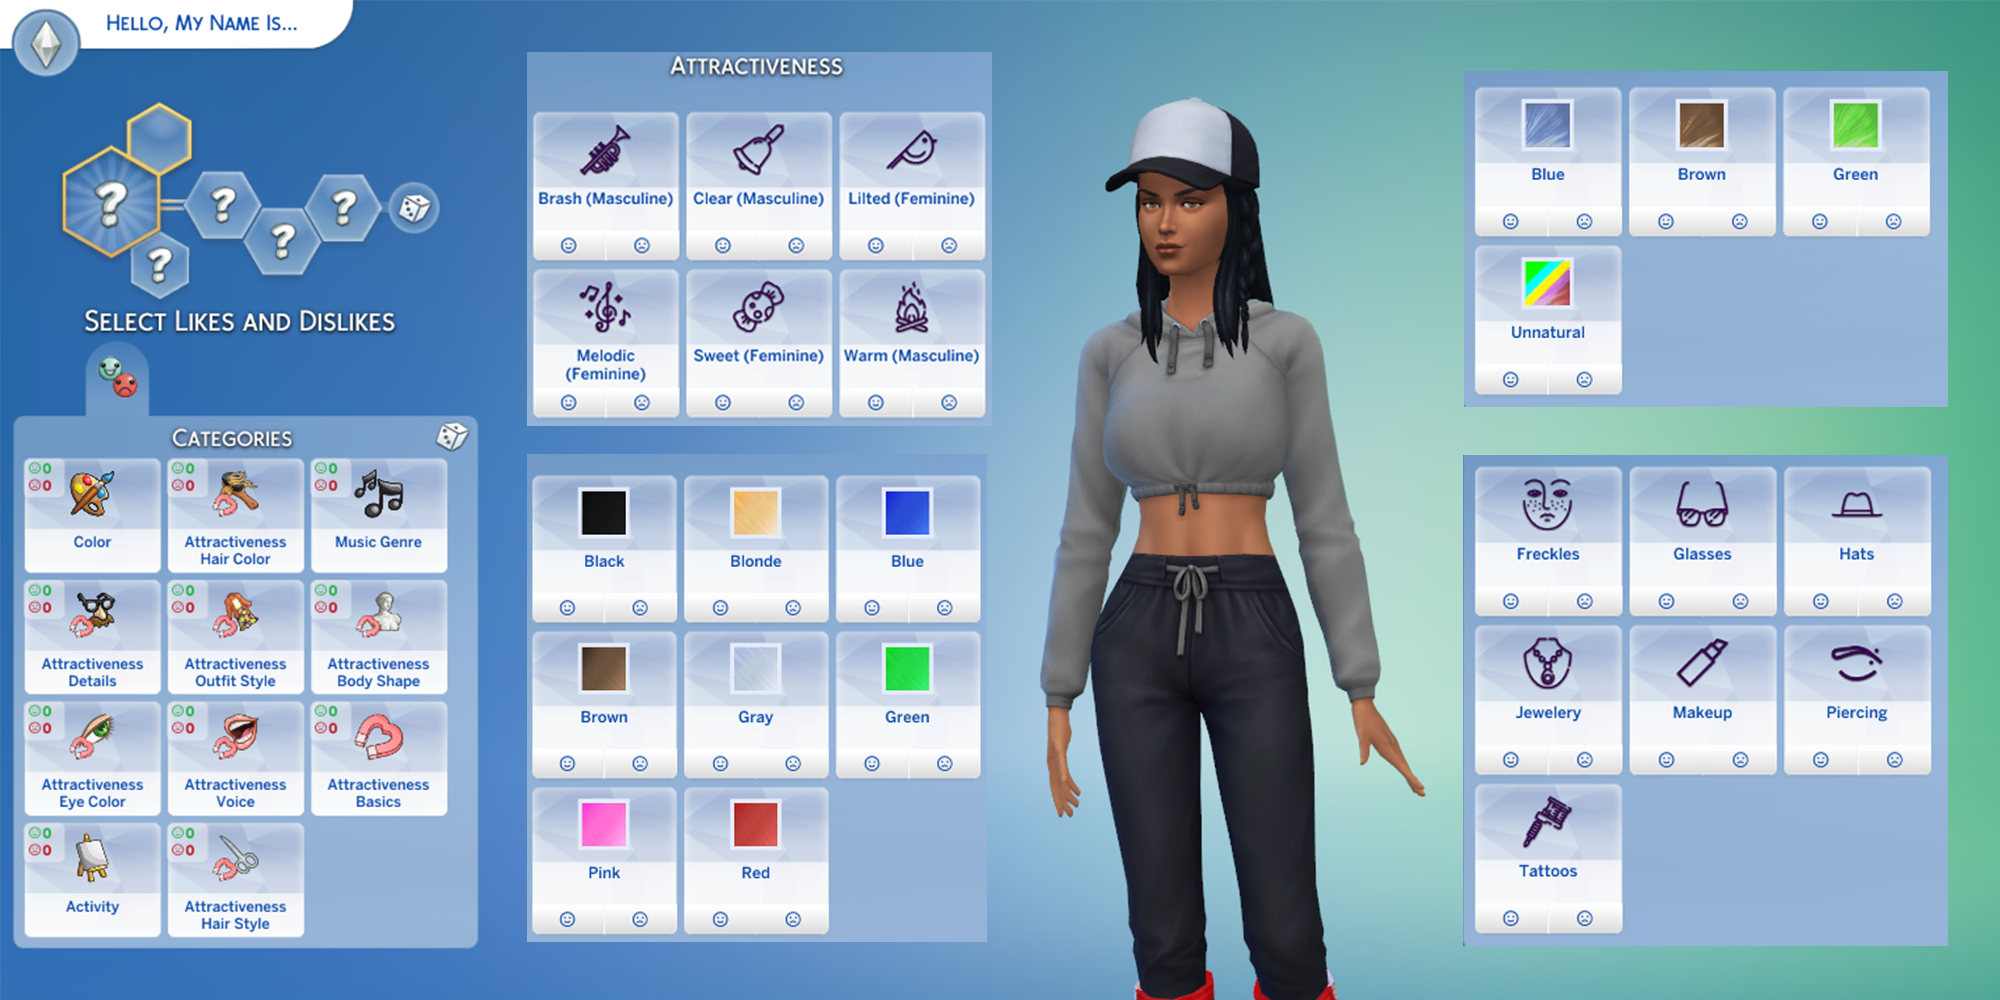 Menu of Sims 4 create a sim showing some of the options in picking your Sim's preferences.